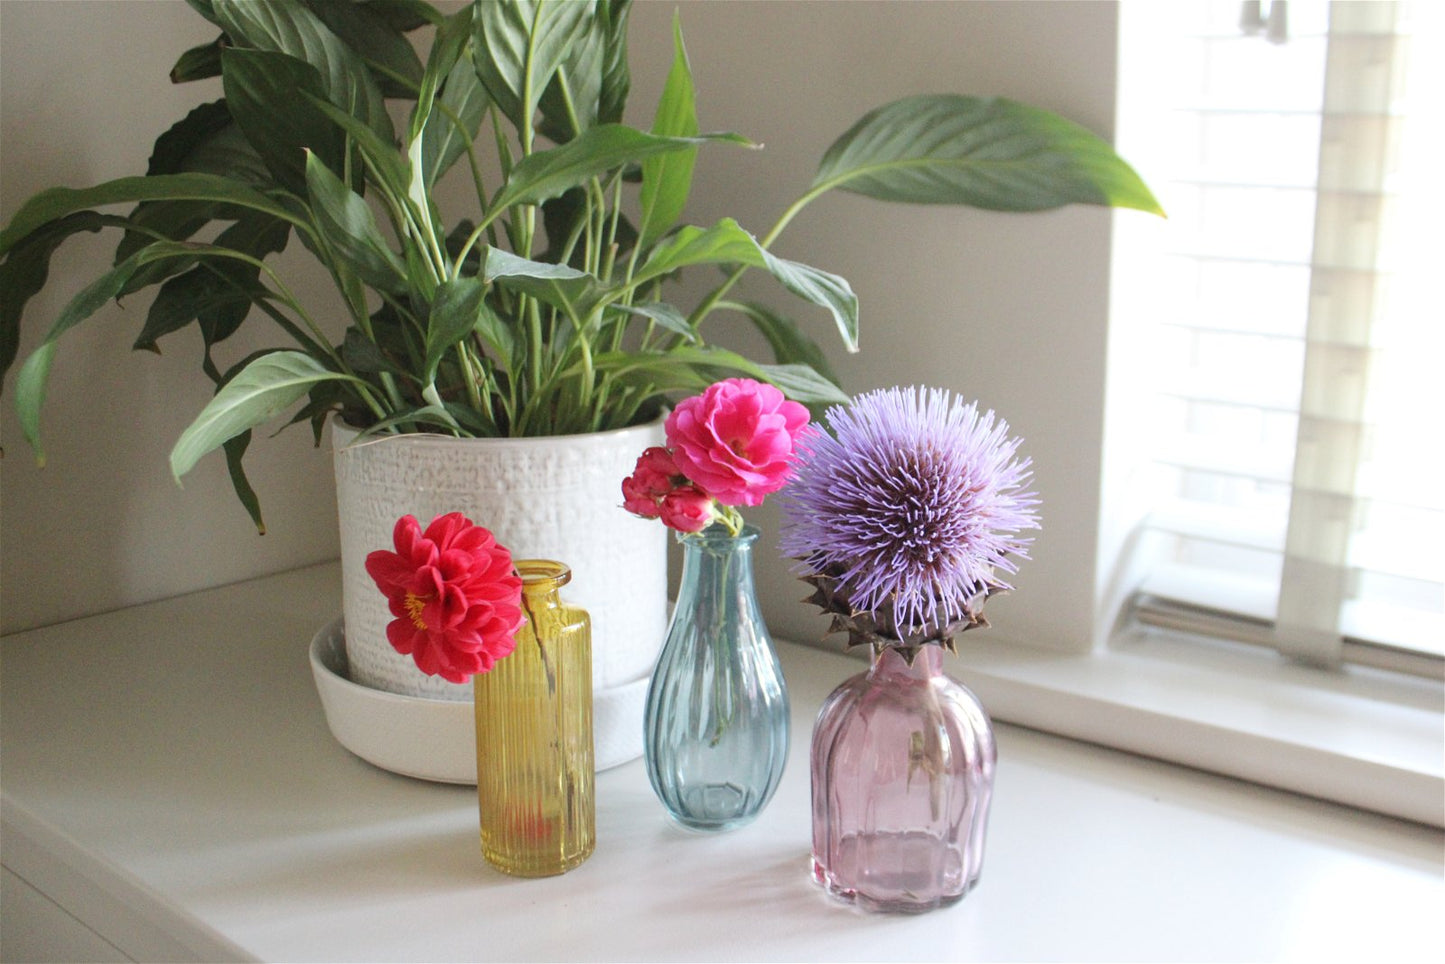 Set of Three Colour Glass Vases - a Cheeky Plant